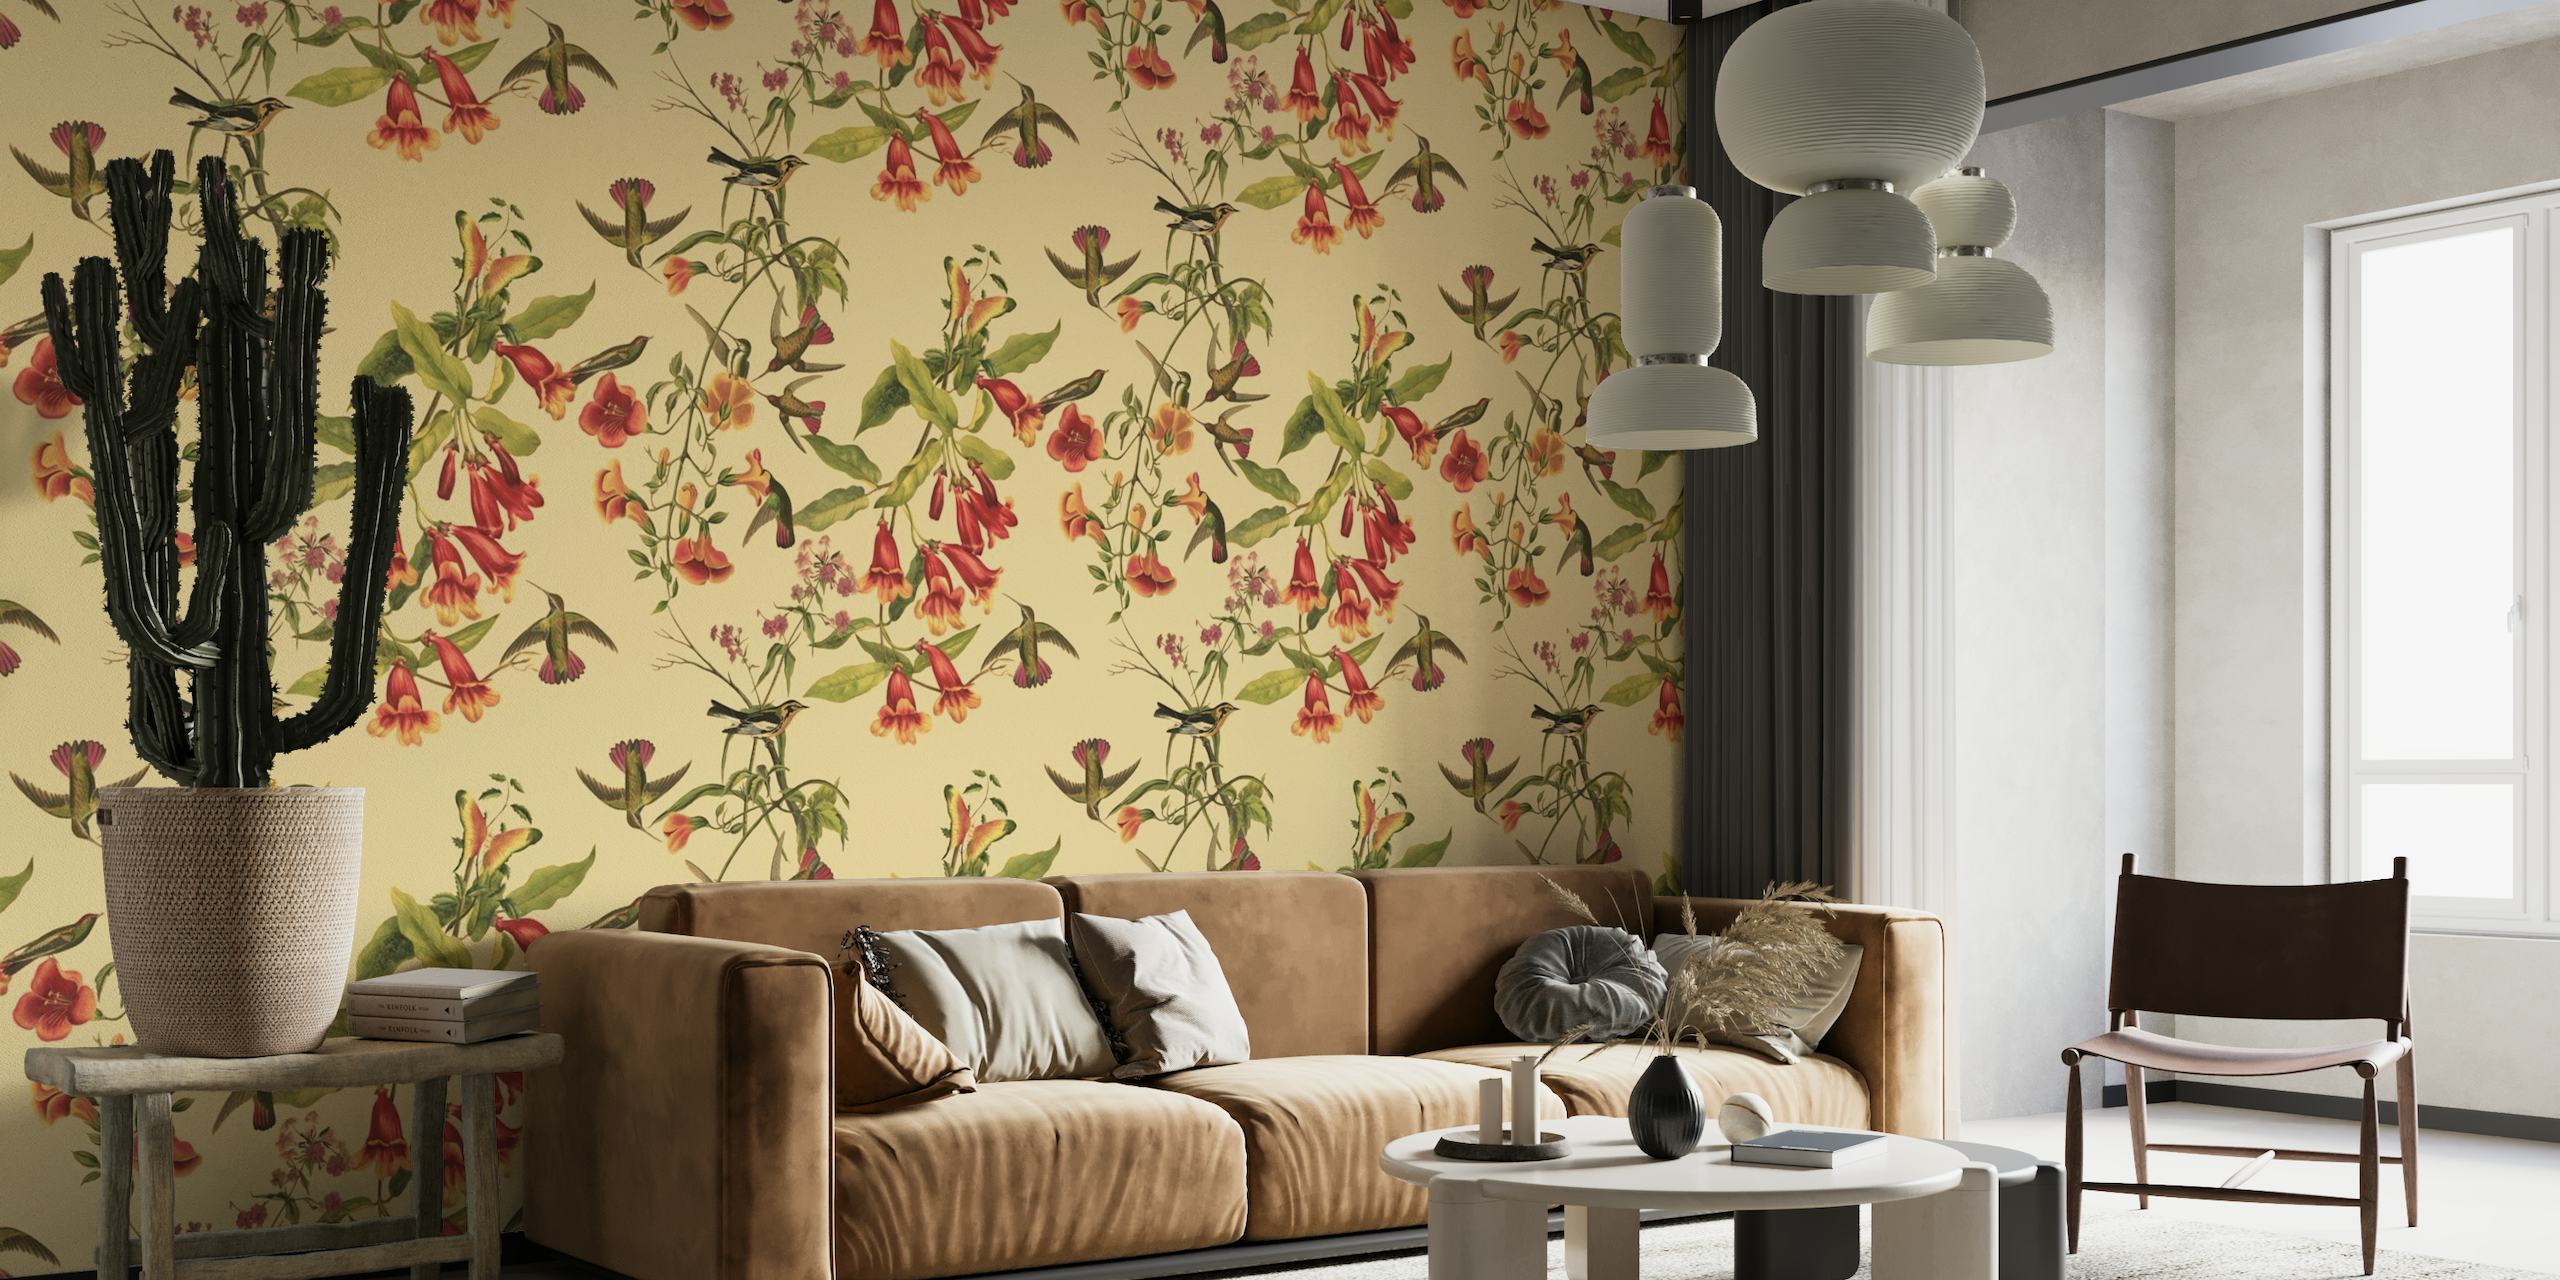 Elegant hummingbirds and antique floral pattern wall mural on a neutral backdrop